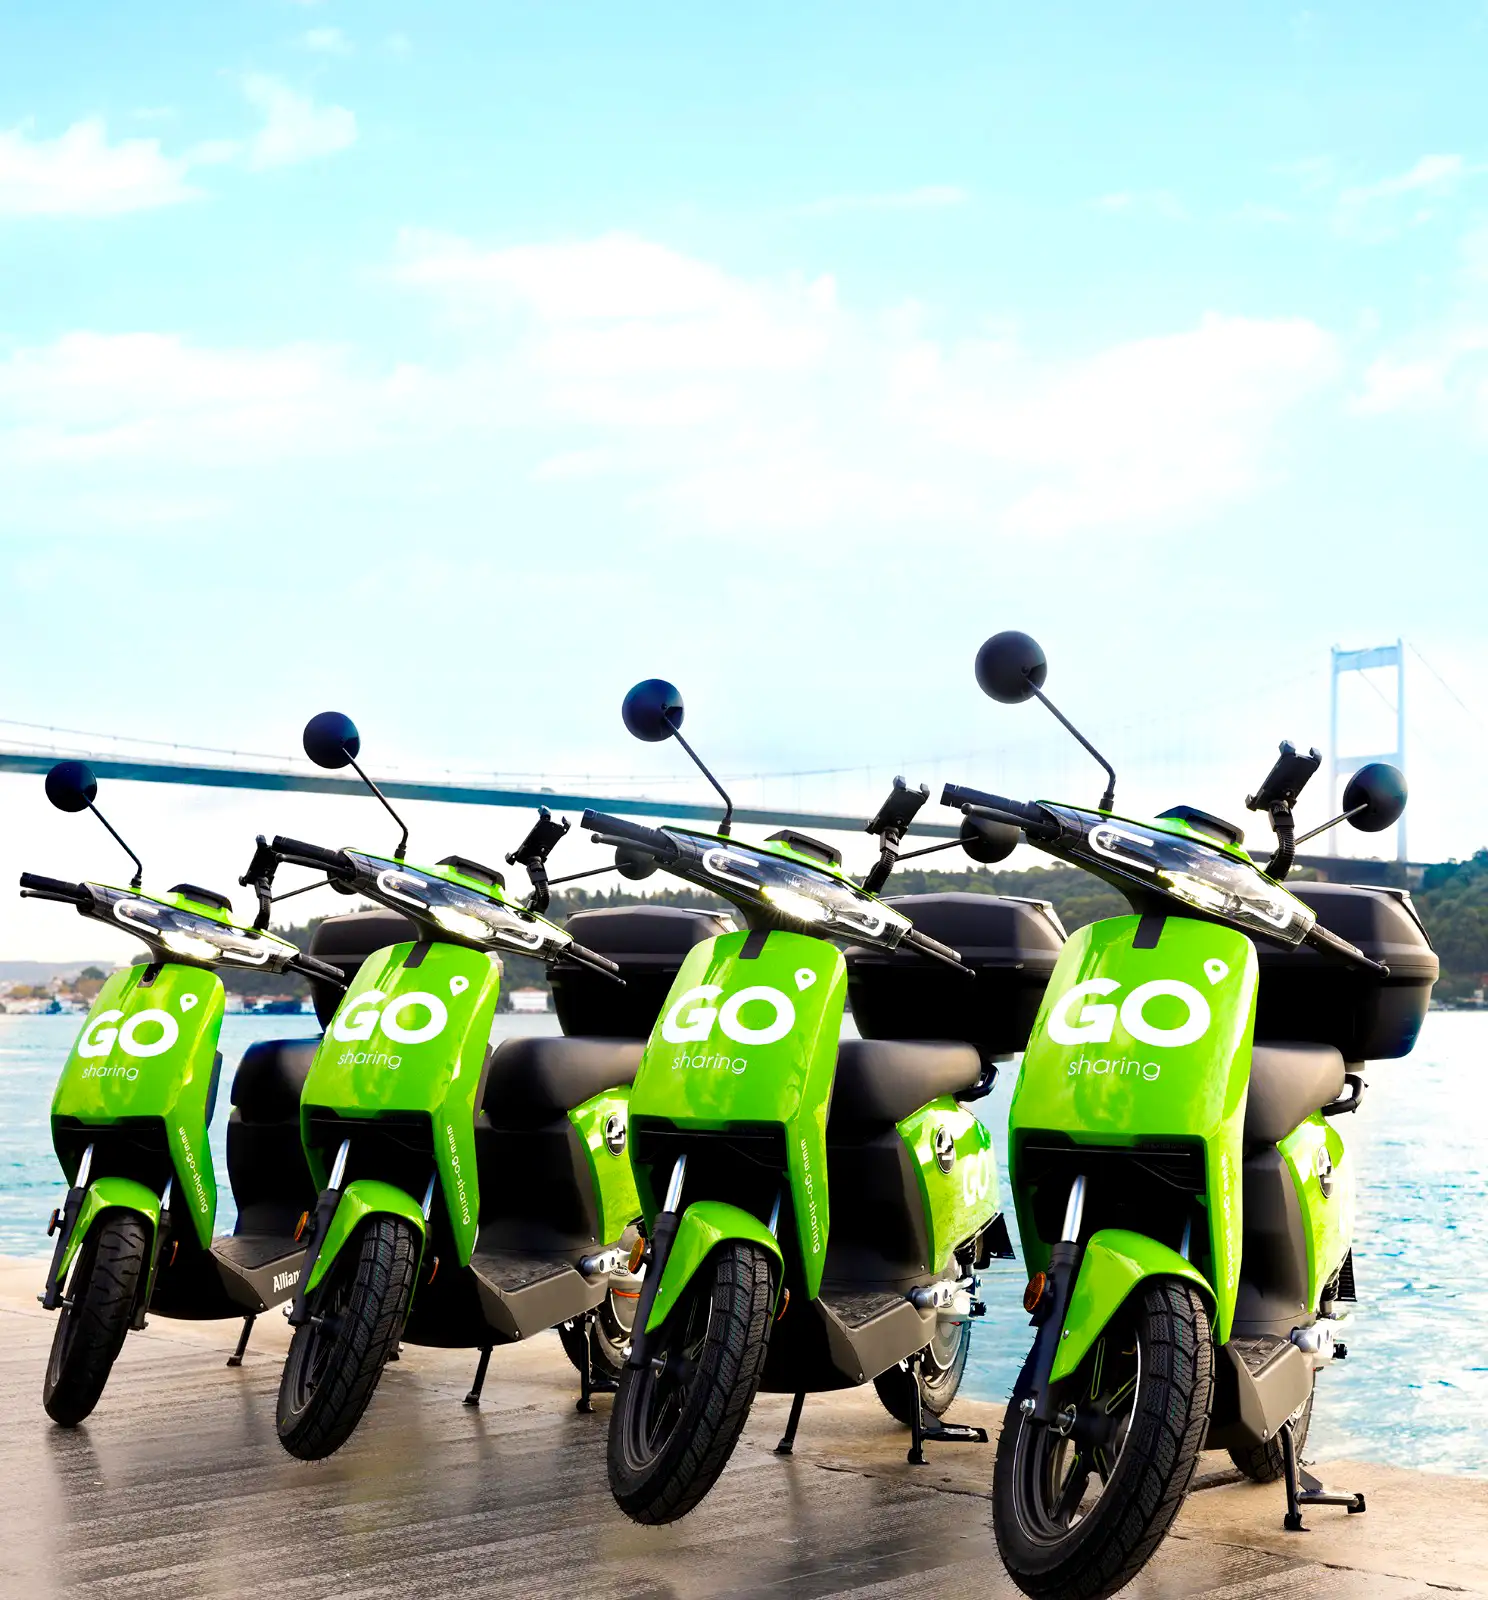 GO Sharing | A green planet with mobility for everyone